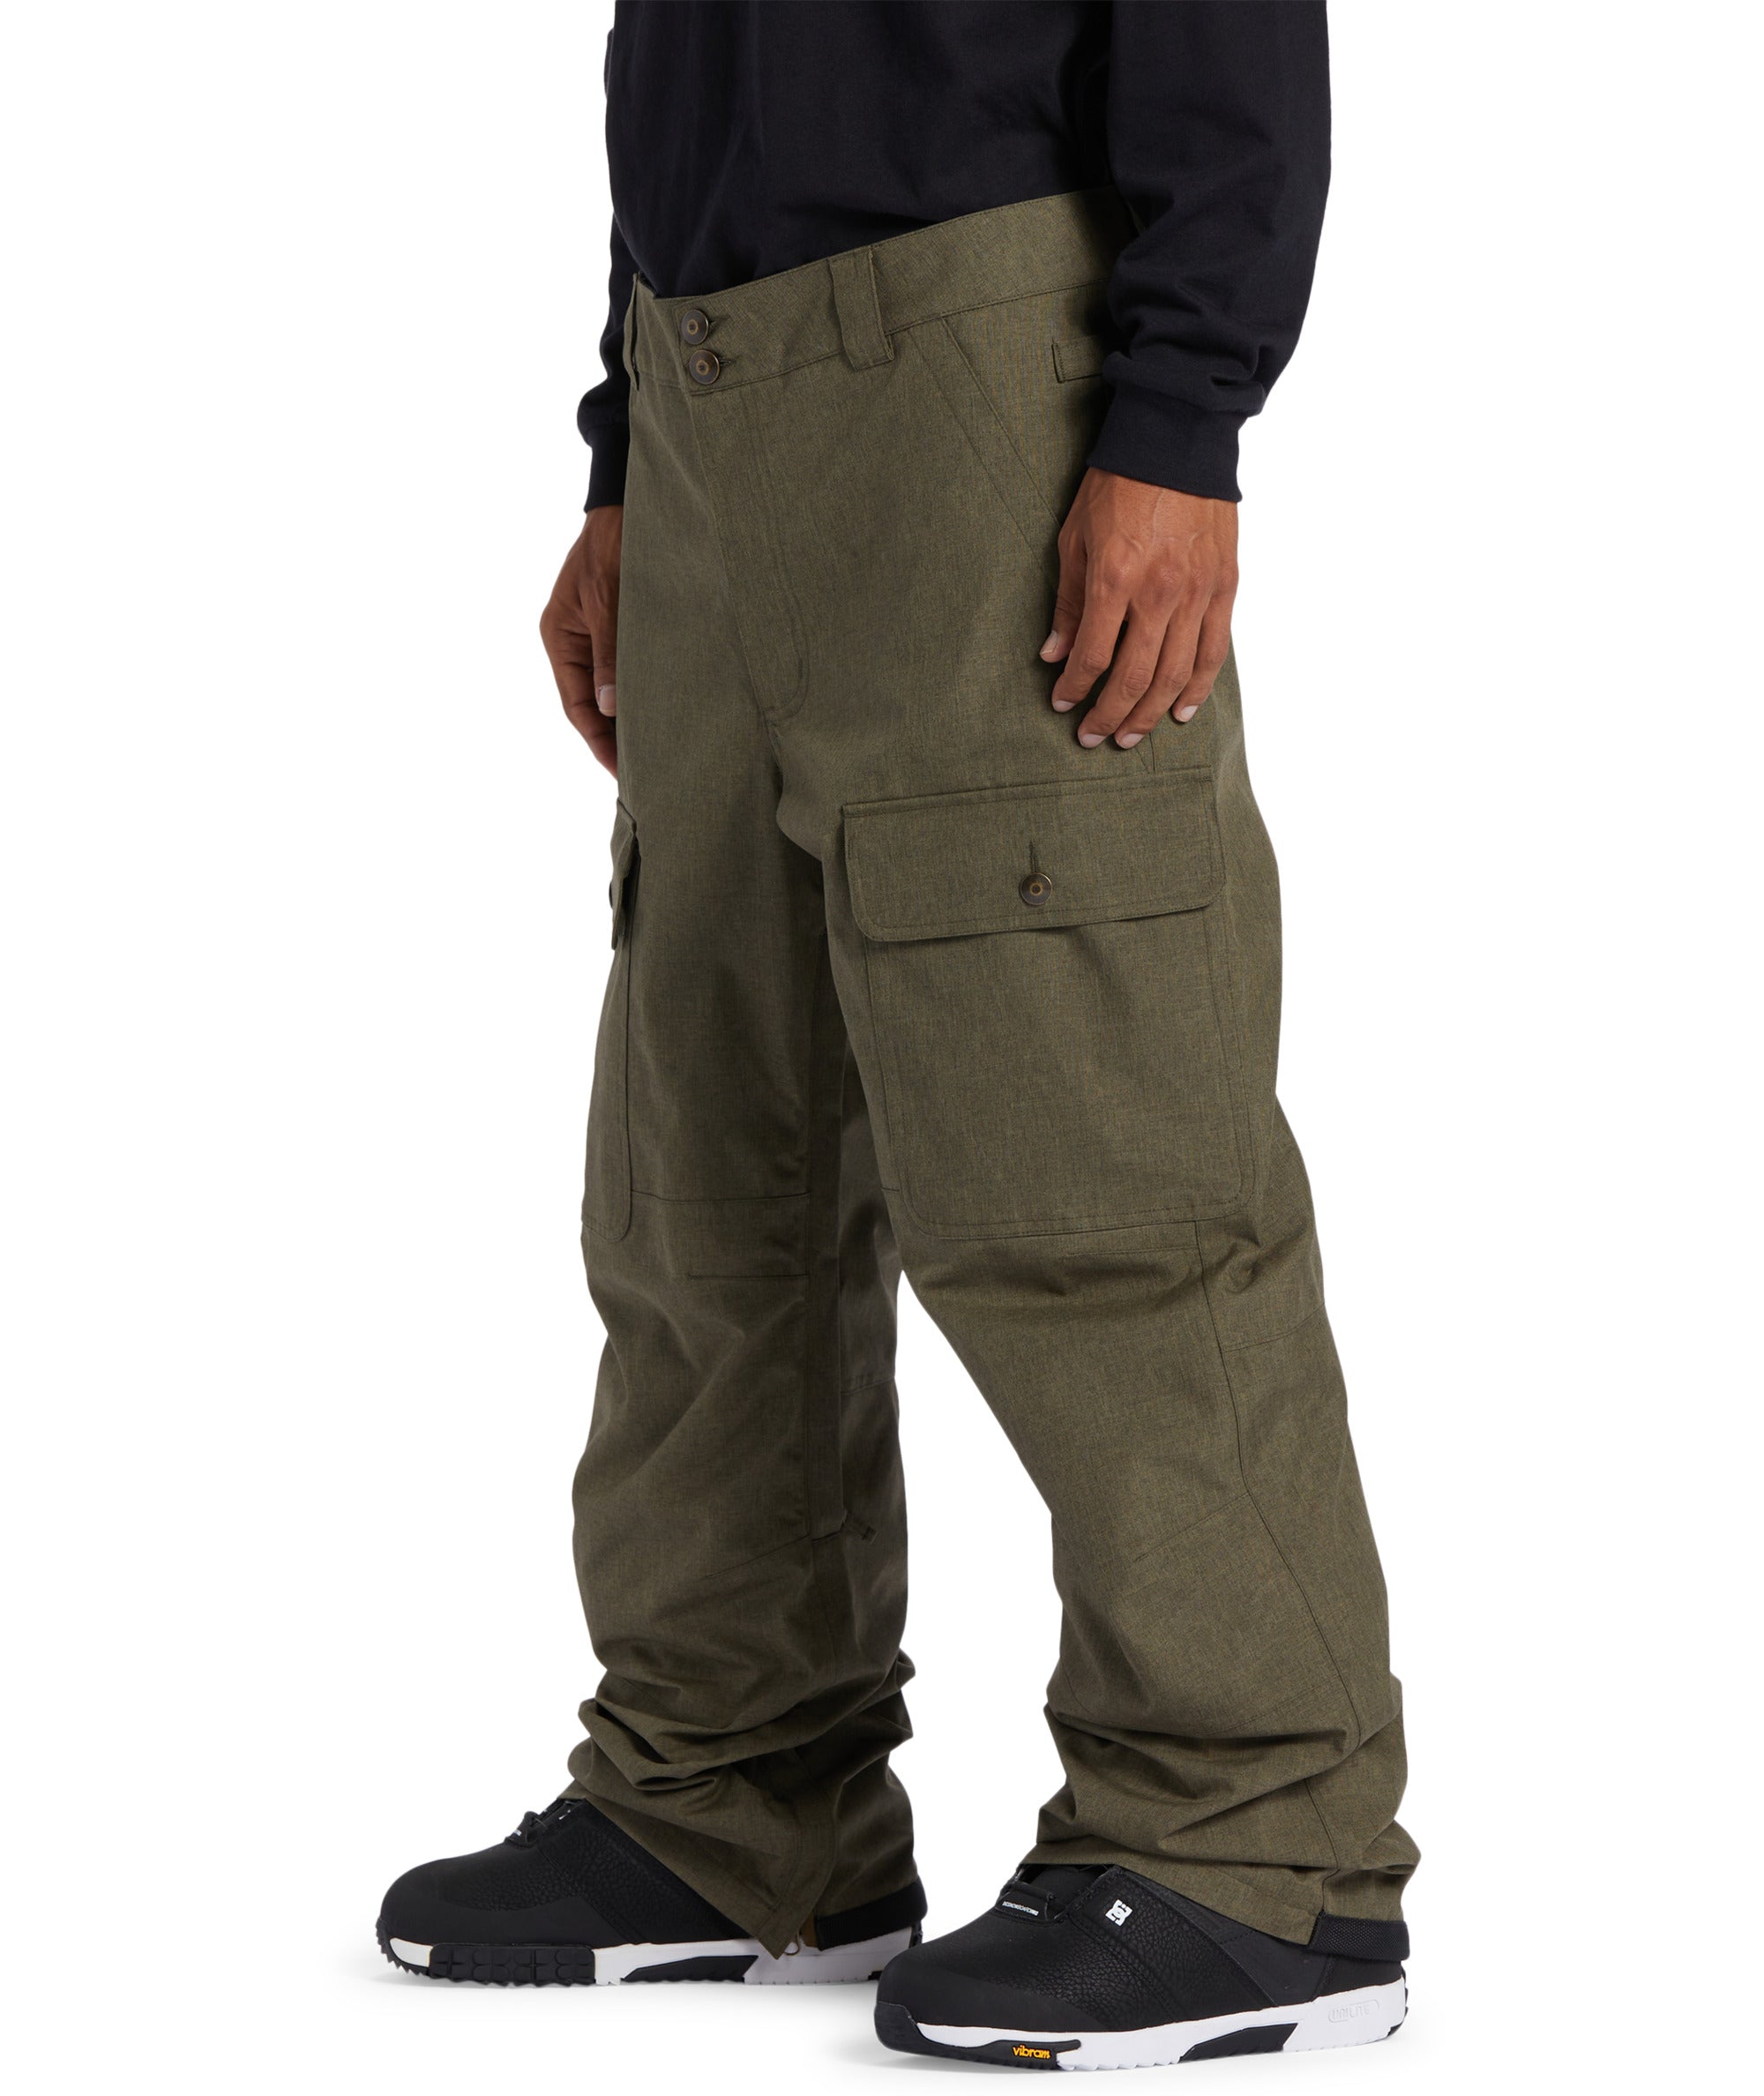 Dc Snow Chino - Technical Snow Pants for Men